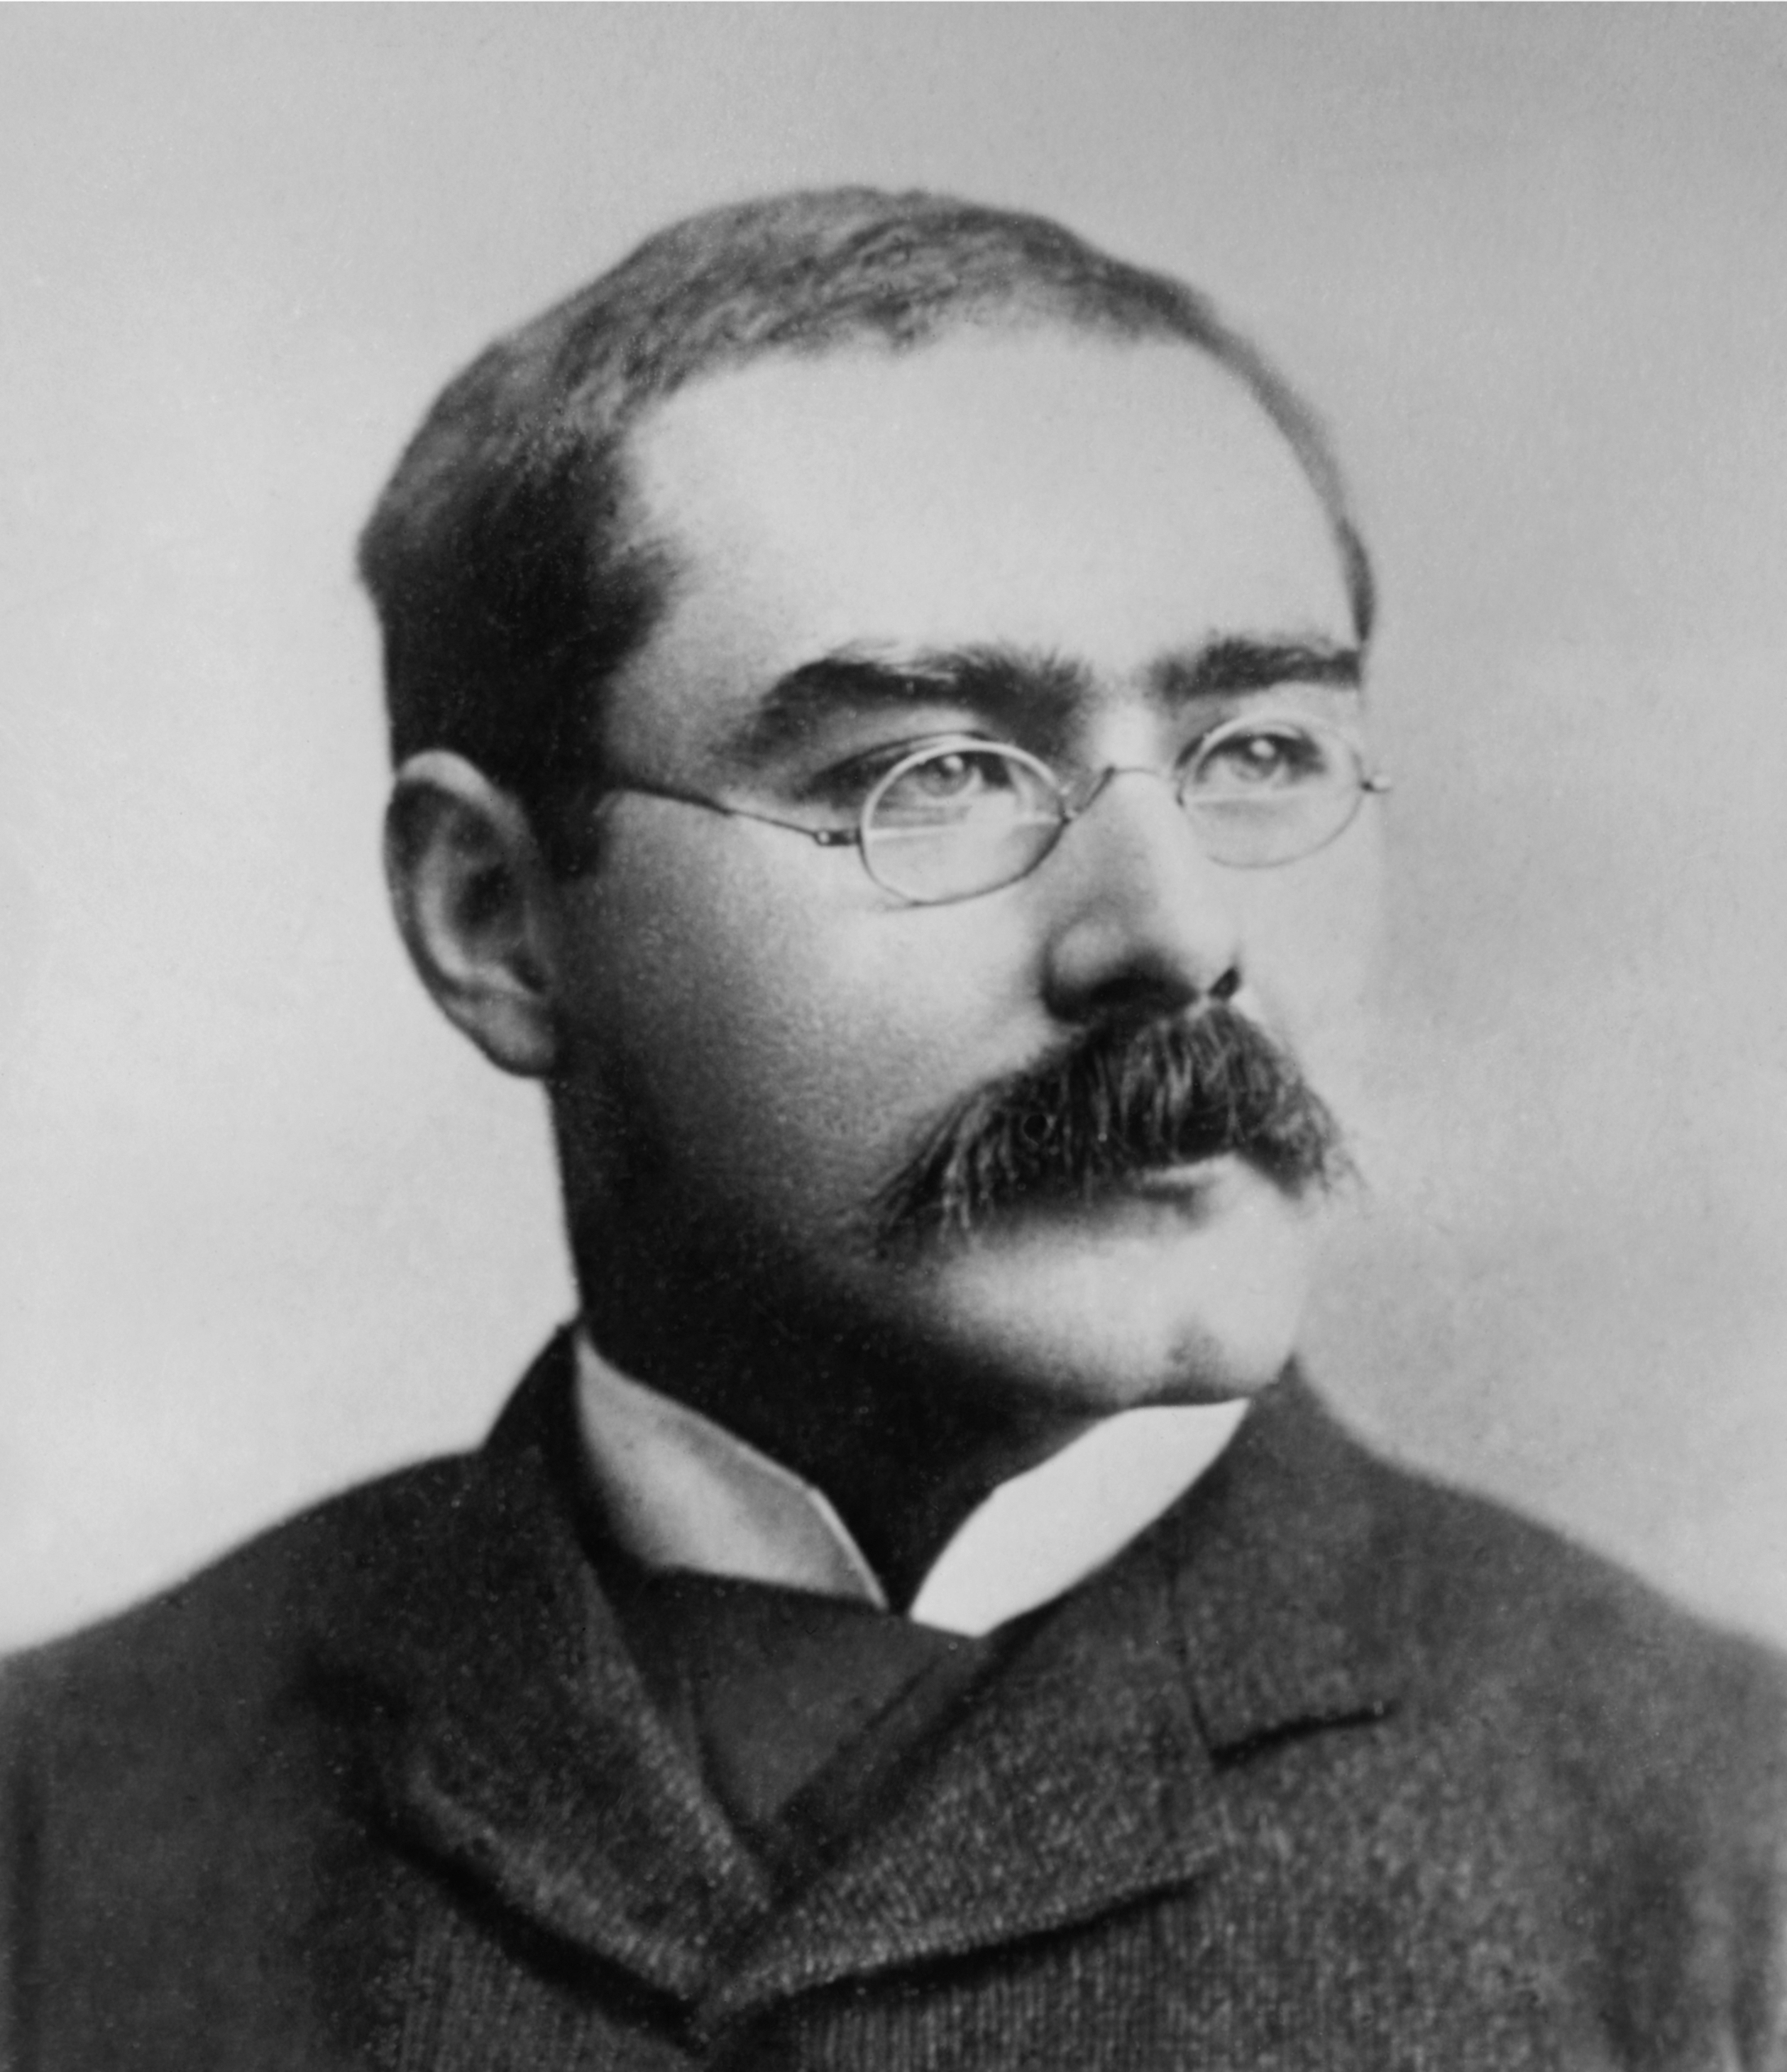 Kipling in the United States (date unknown).